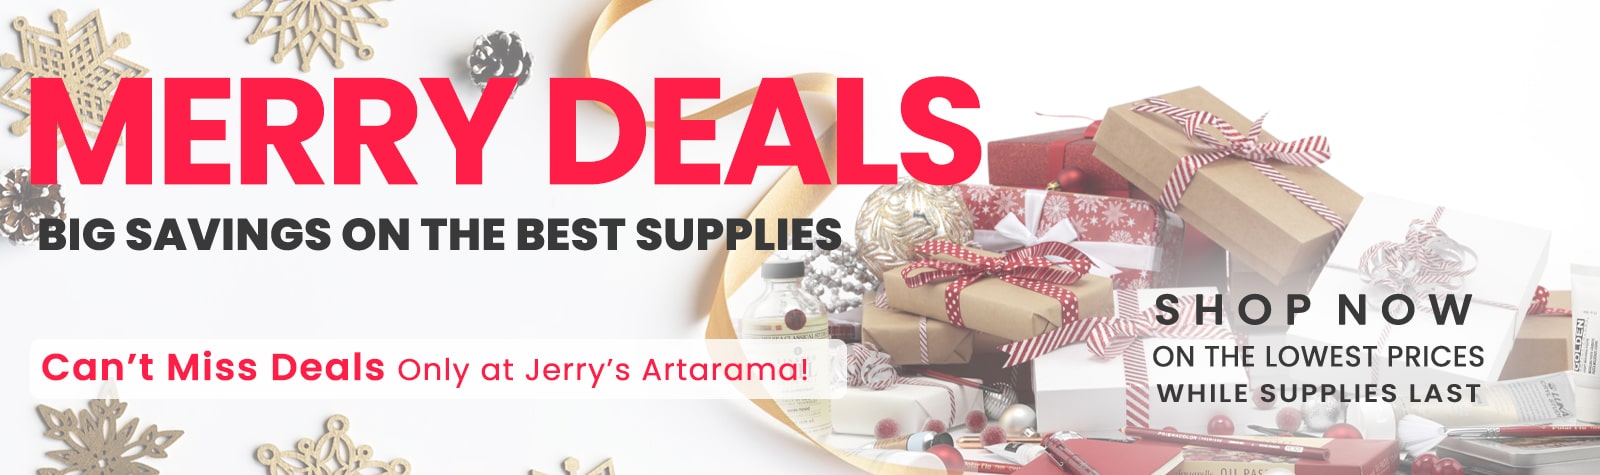 Your Holiday Headquarters - Big Savings on The Best Supplies. Shop Now